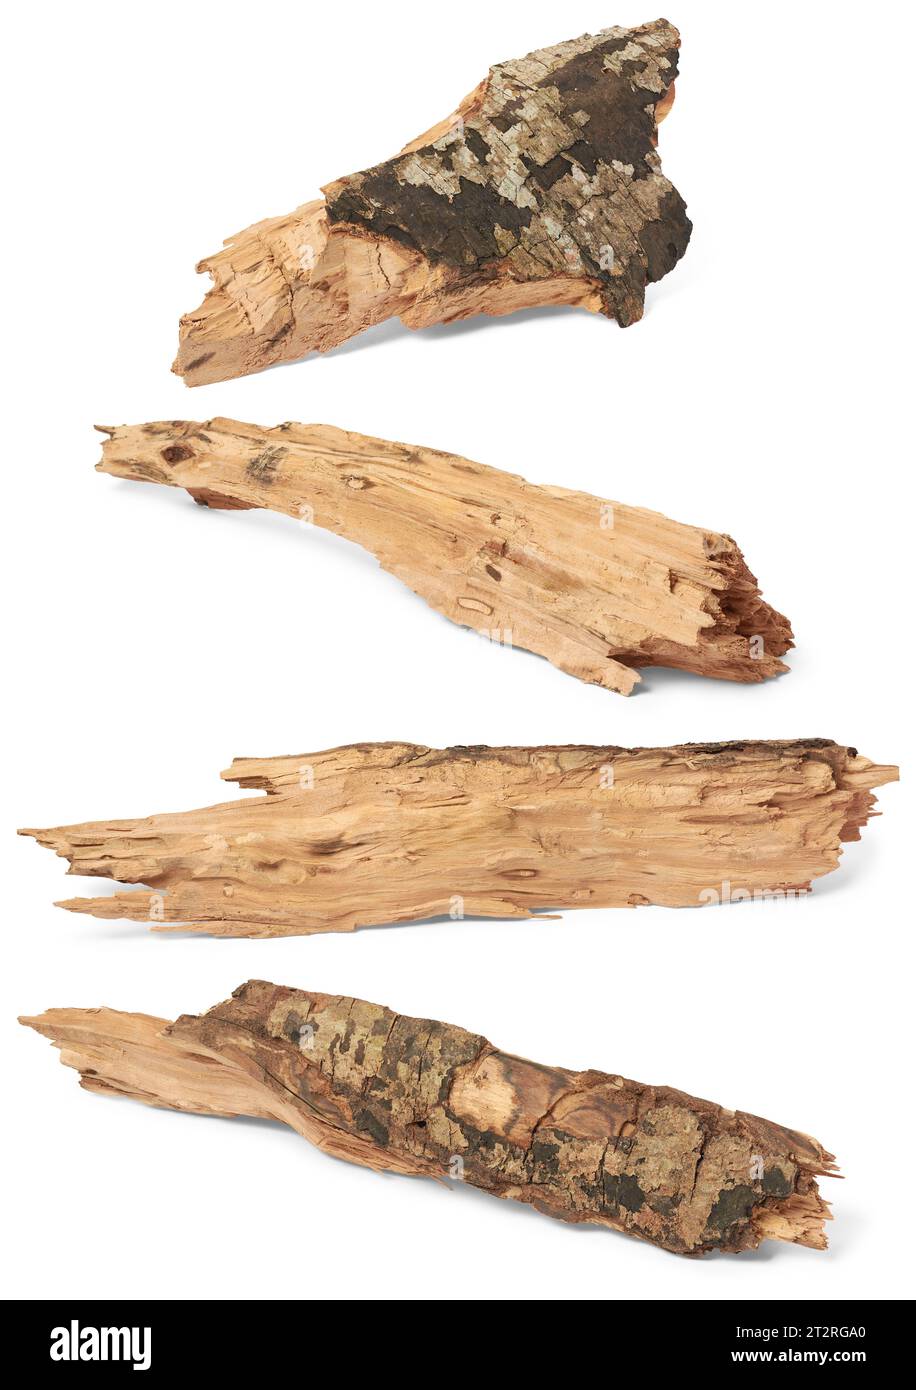 set of chopped firewood pieces, seasoned hardwood prepared for use as fuel in fireplaces, wood stoves or outdoor fire pits, common source of heat Stock Photo